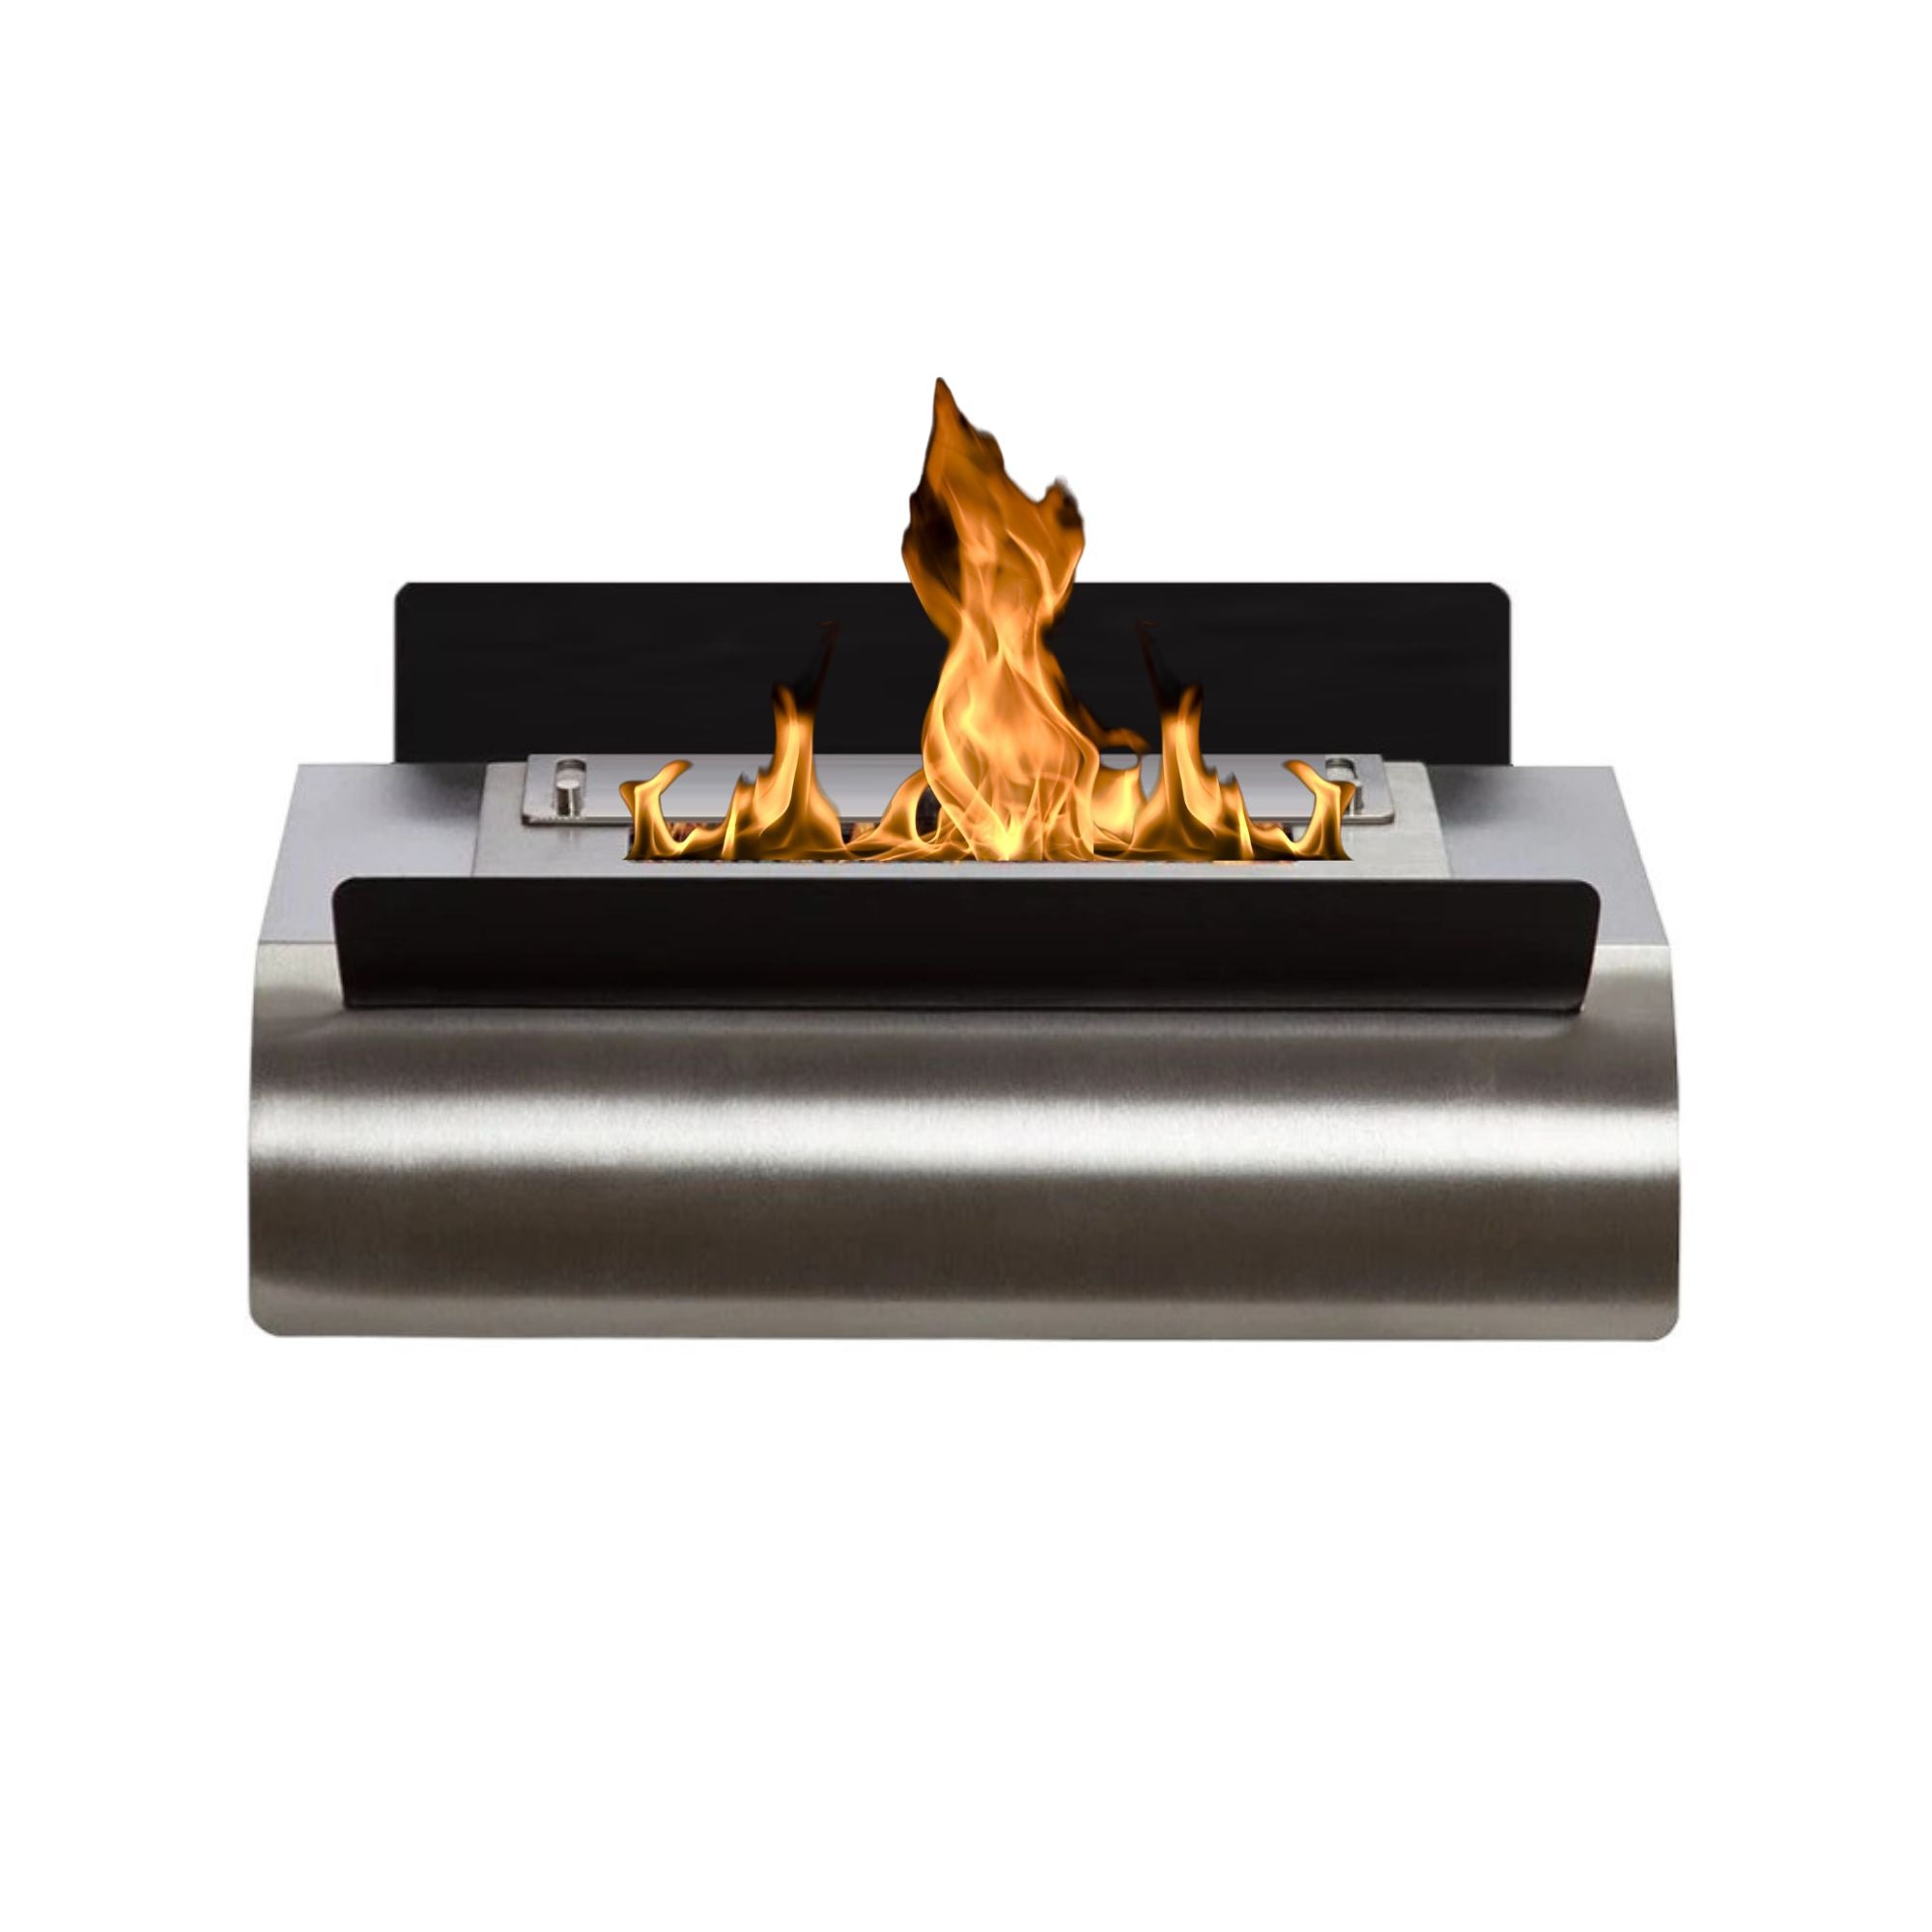 Adia stainless steel table fireplace